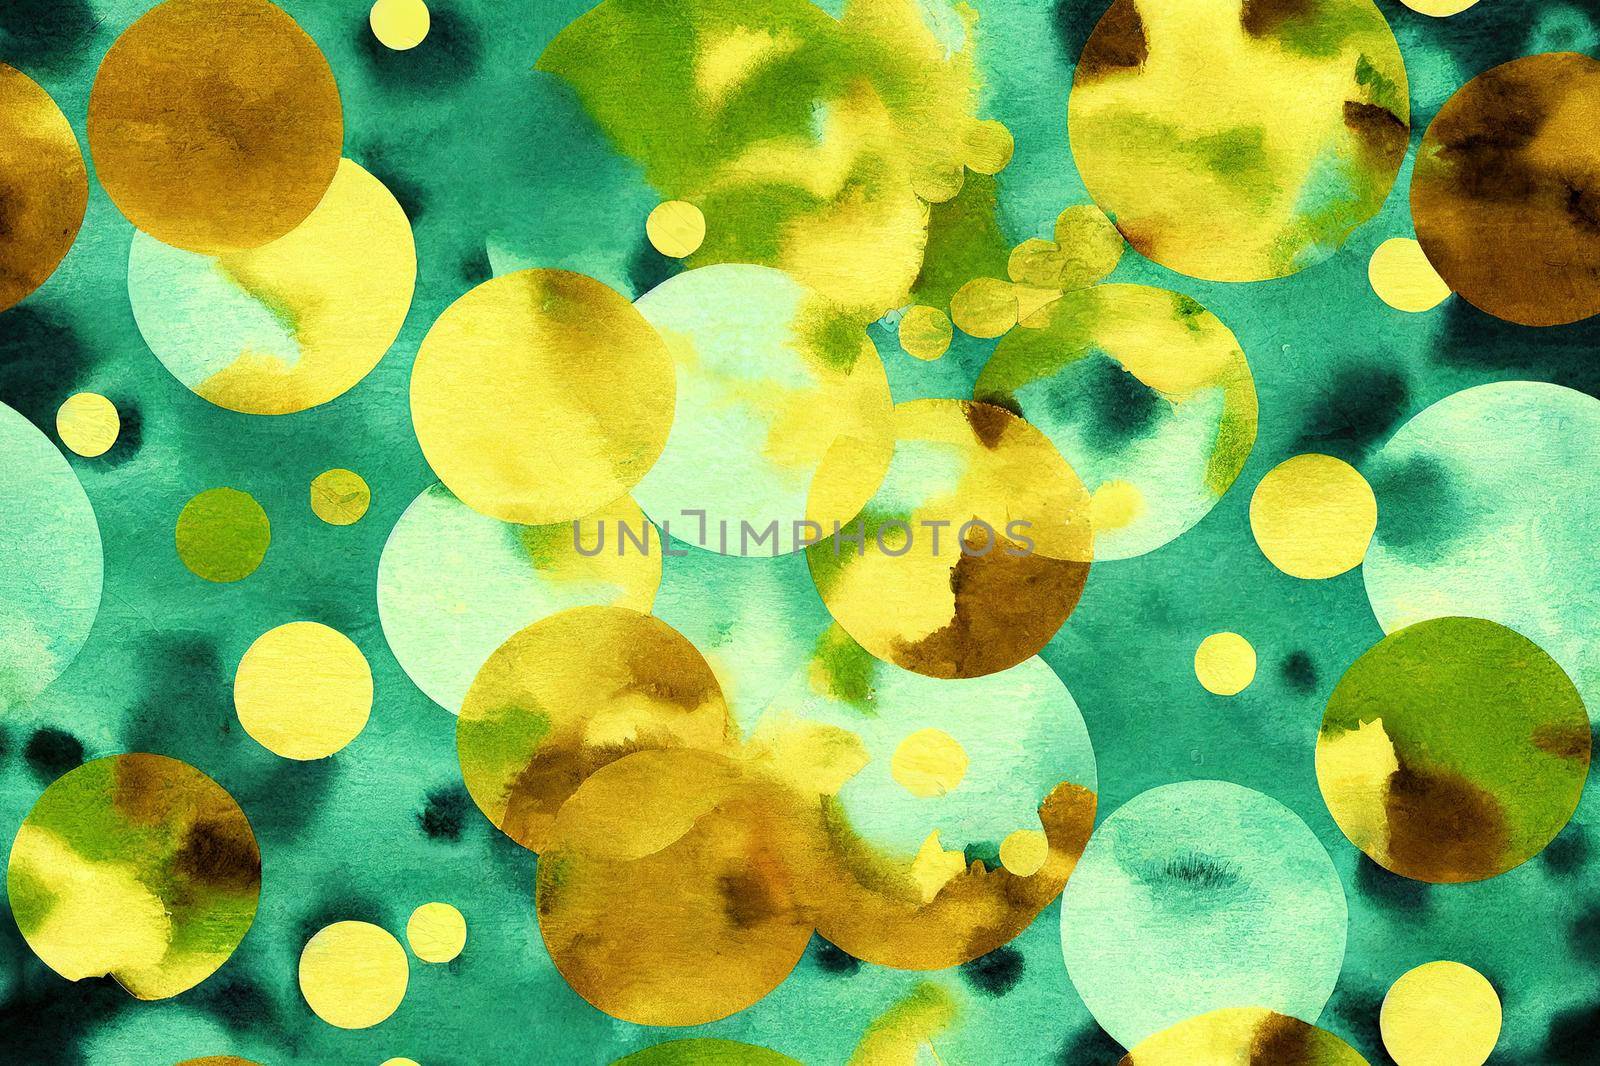 Abstract watercolor nature green seamless pattern with gold texture, golden motif, dried leaves and circle shapes. Contemporary textile, fabric, wallpaper, repeat background design.